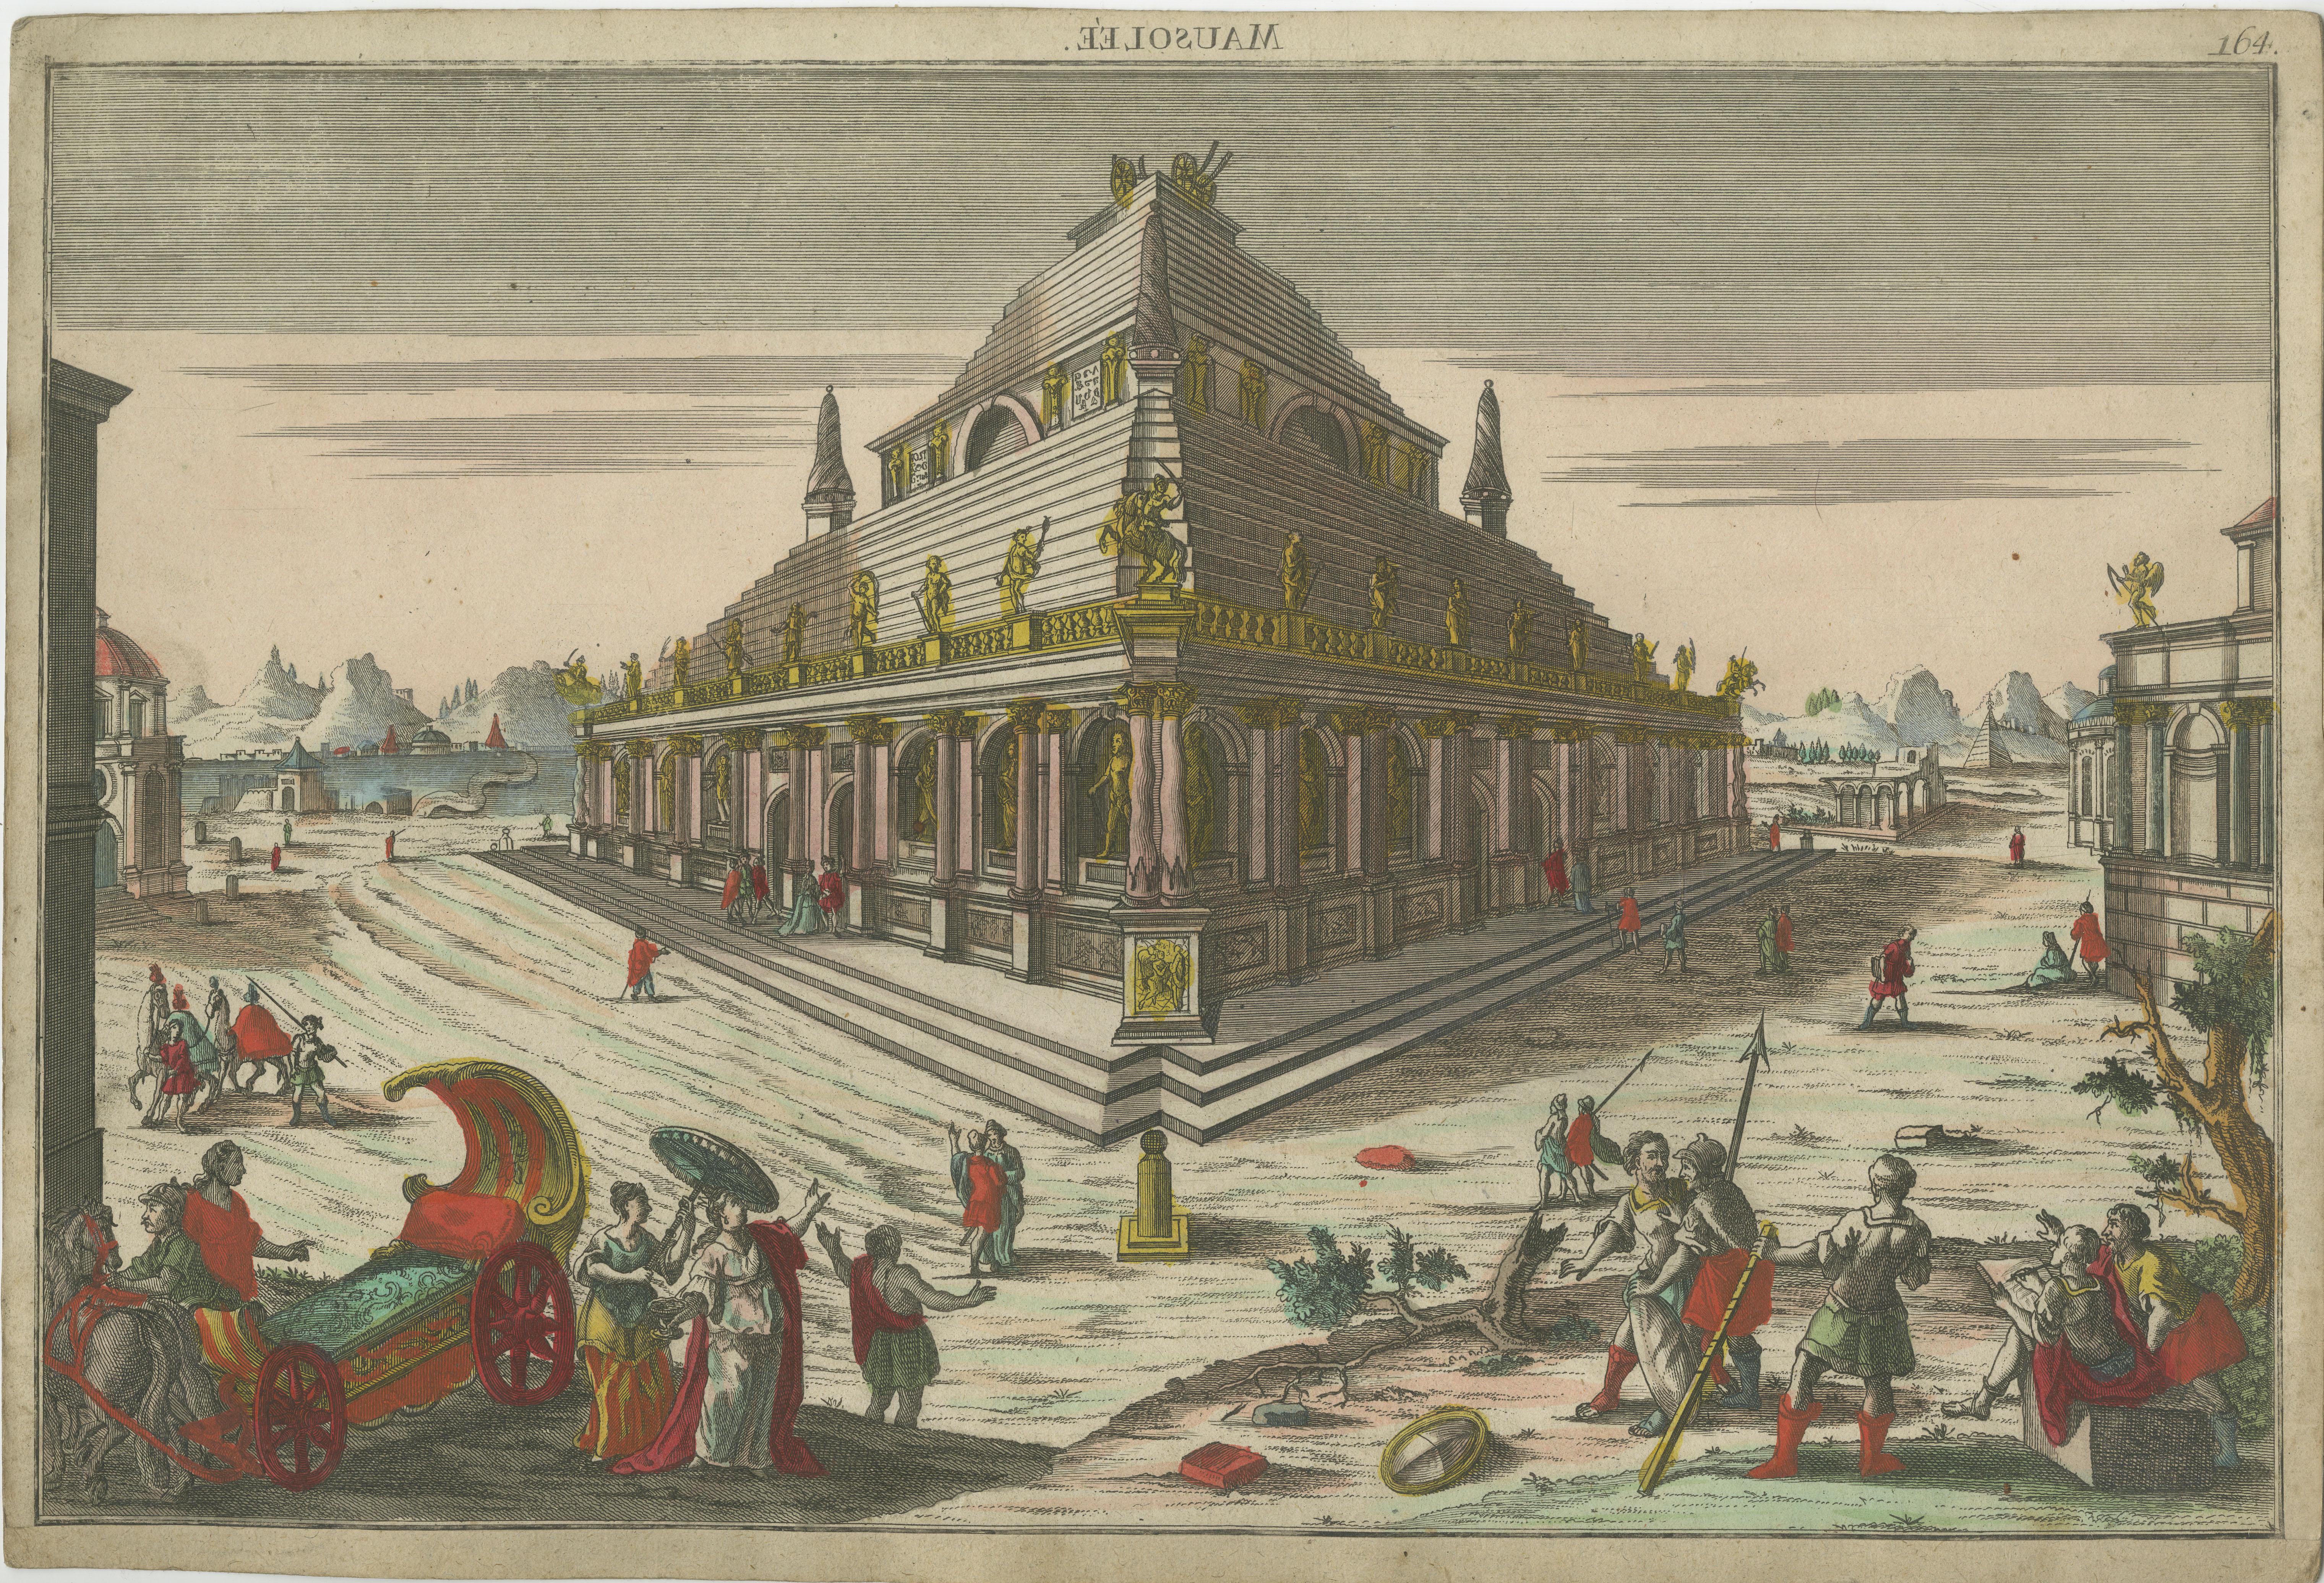 Antique print titled 'Mausolee'. A vue d'optique of the Mausoleum of Halicarnassus, Halicarnassus also spelled Halikarnassos, one of the Seven Wonders of the World. The monument was the tomb of Mausolus, ruler of Caria, in southwestern Asia Minor.